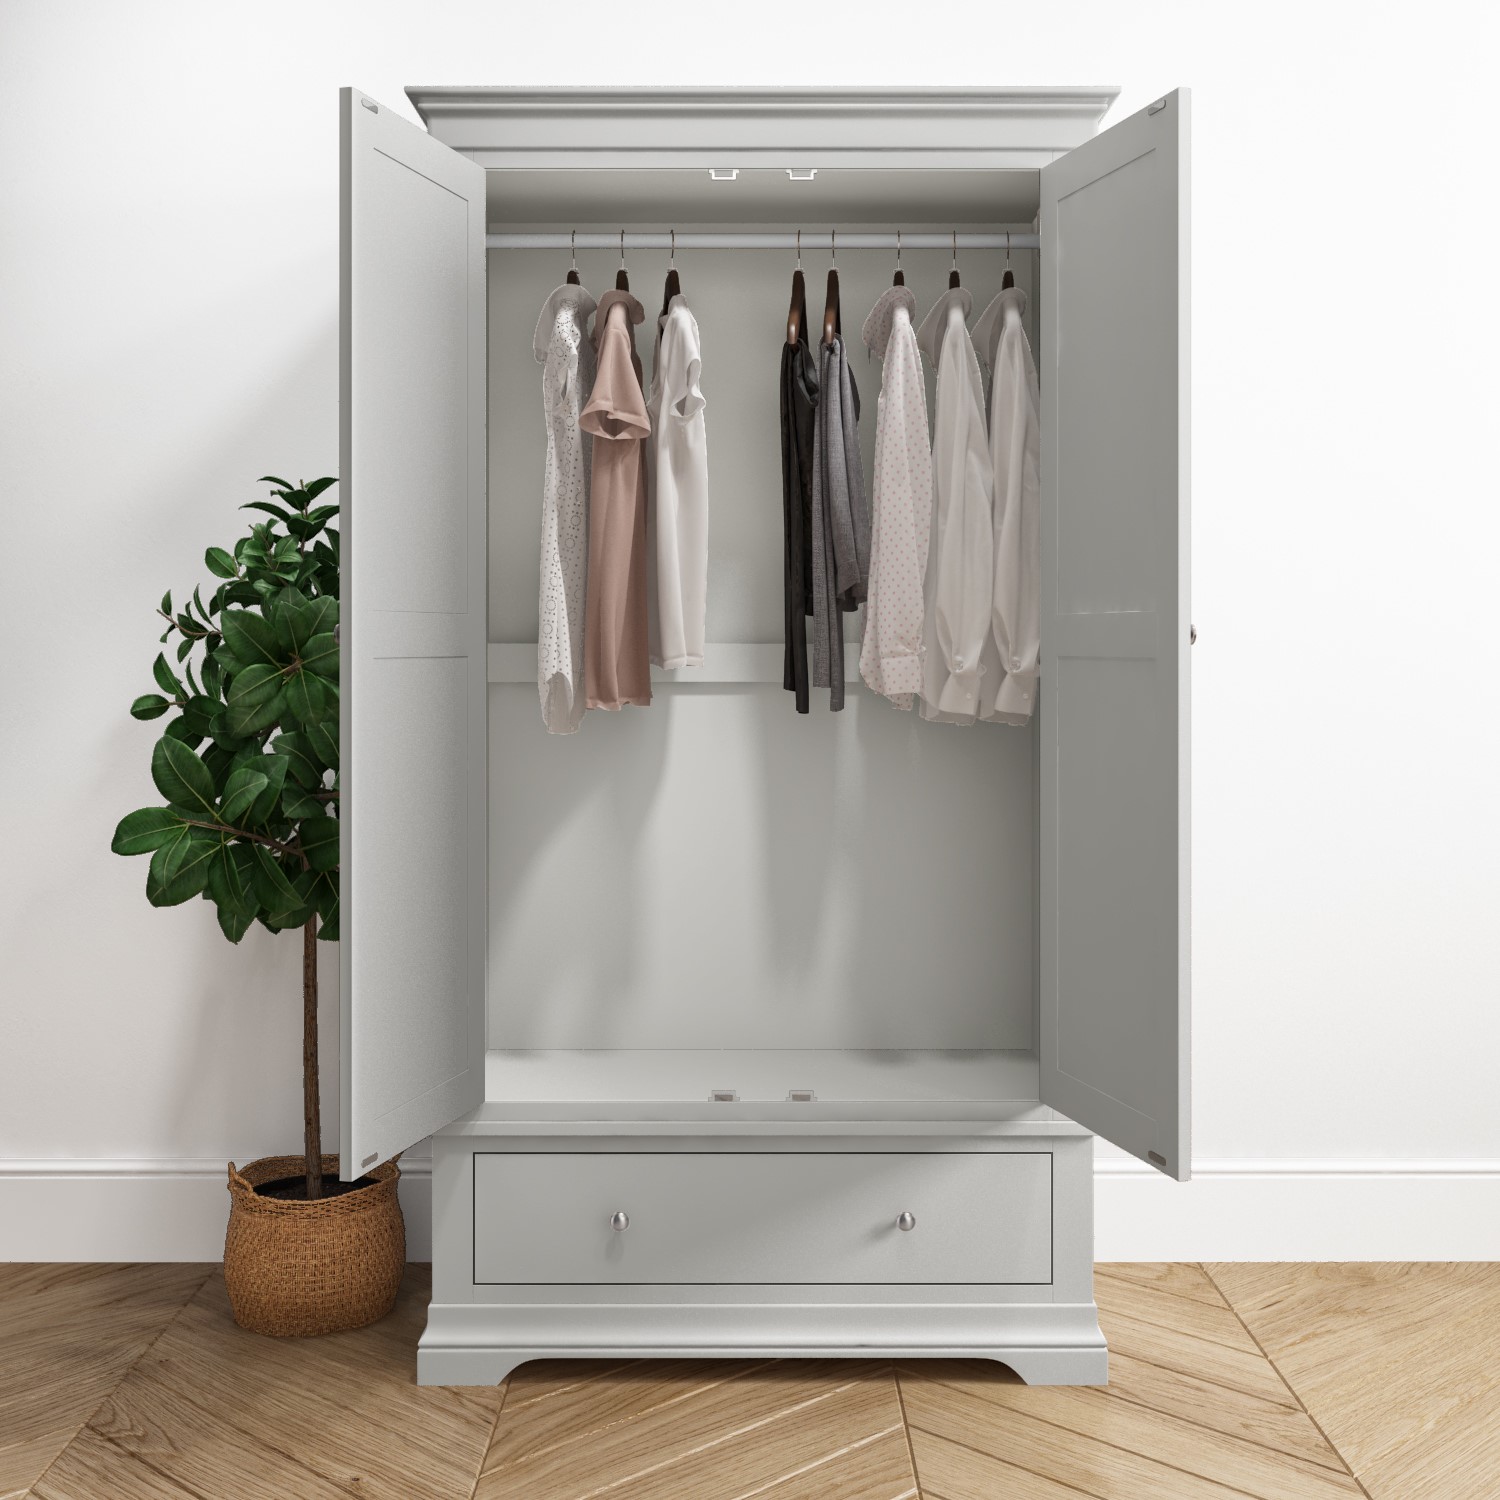 Read more about Pale grey 2 door 1 drawer wardrobe olivia